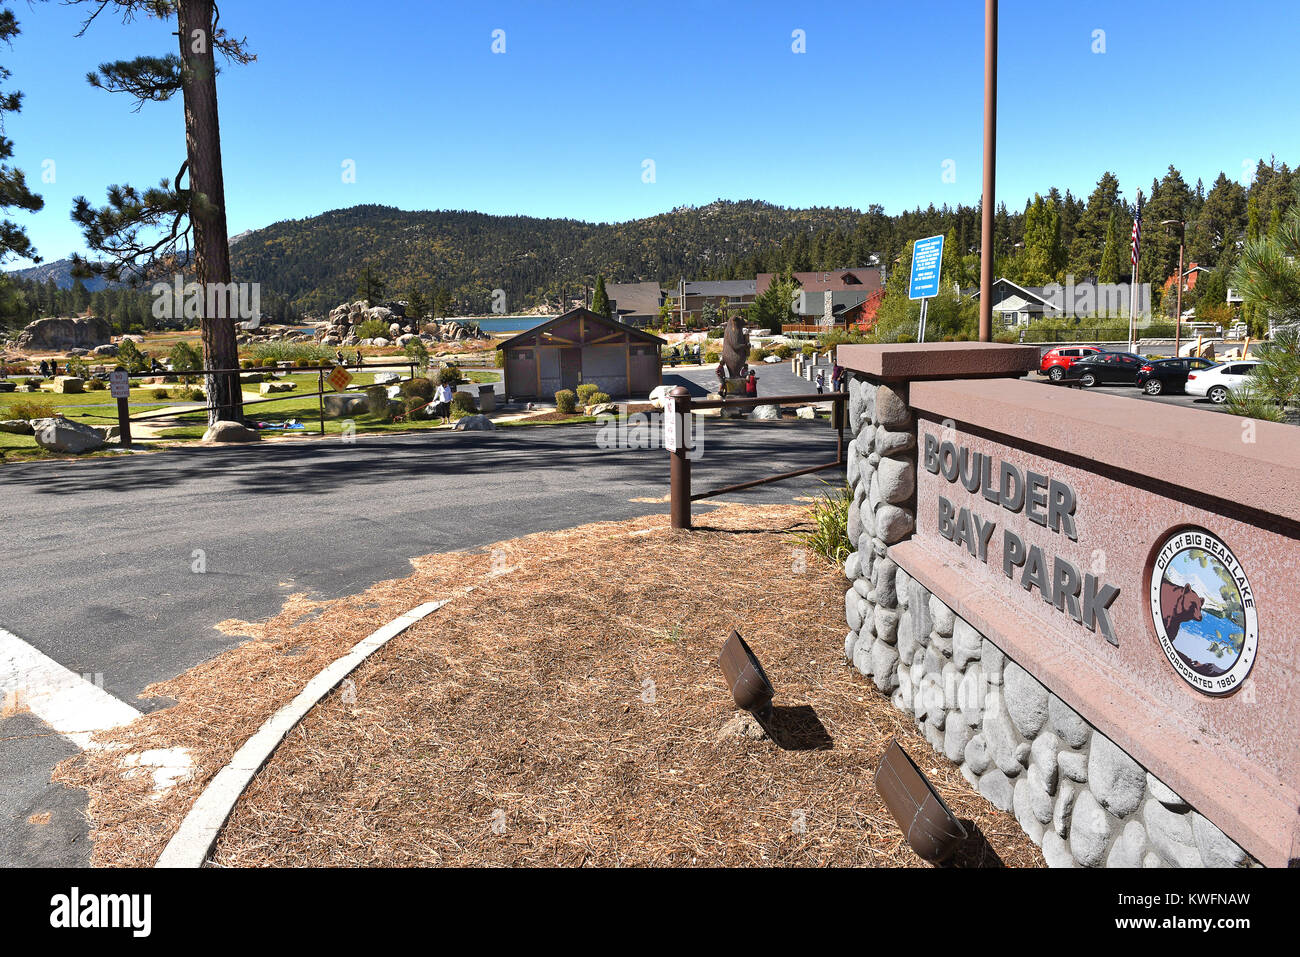 BIG BEAR LAKE, CALIFORNIA - SEPTEMBER 25, 2016: Boulder Bay Park, The Park opened in 2010 and features fishing, kayaking, canoeing, bandstand, picnic  Stock Photo